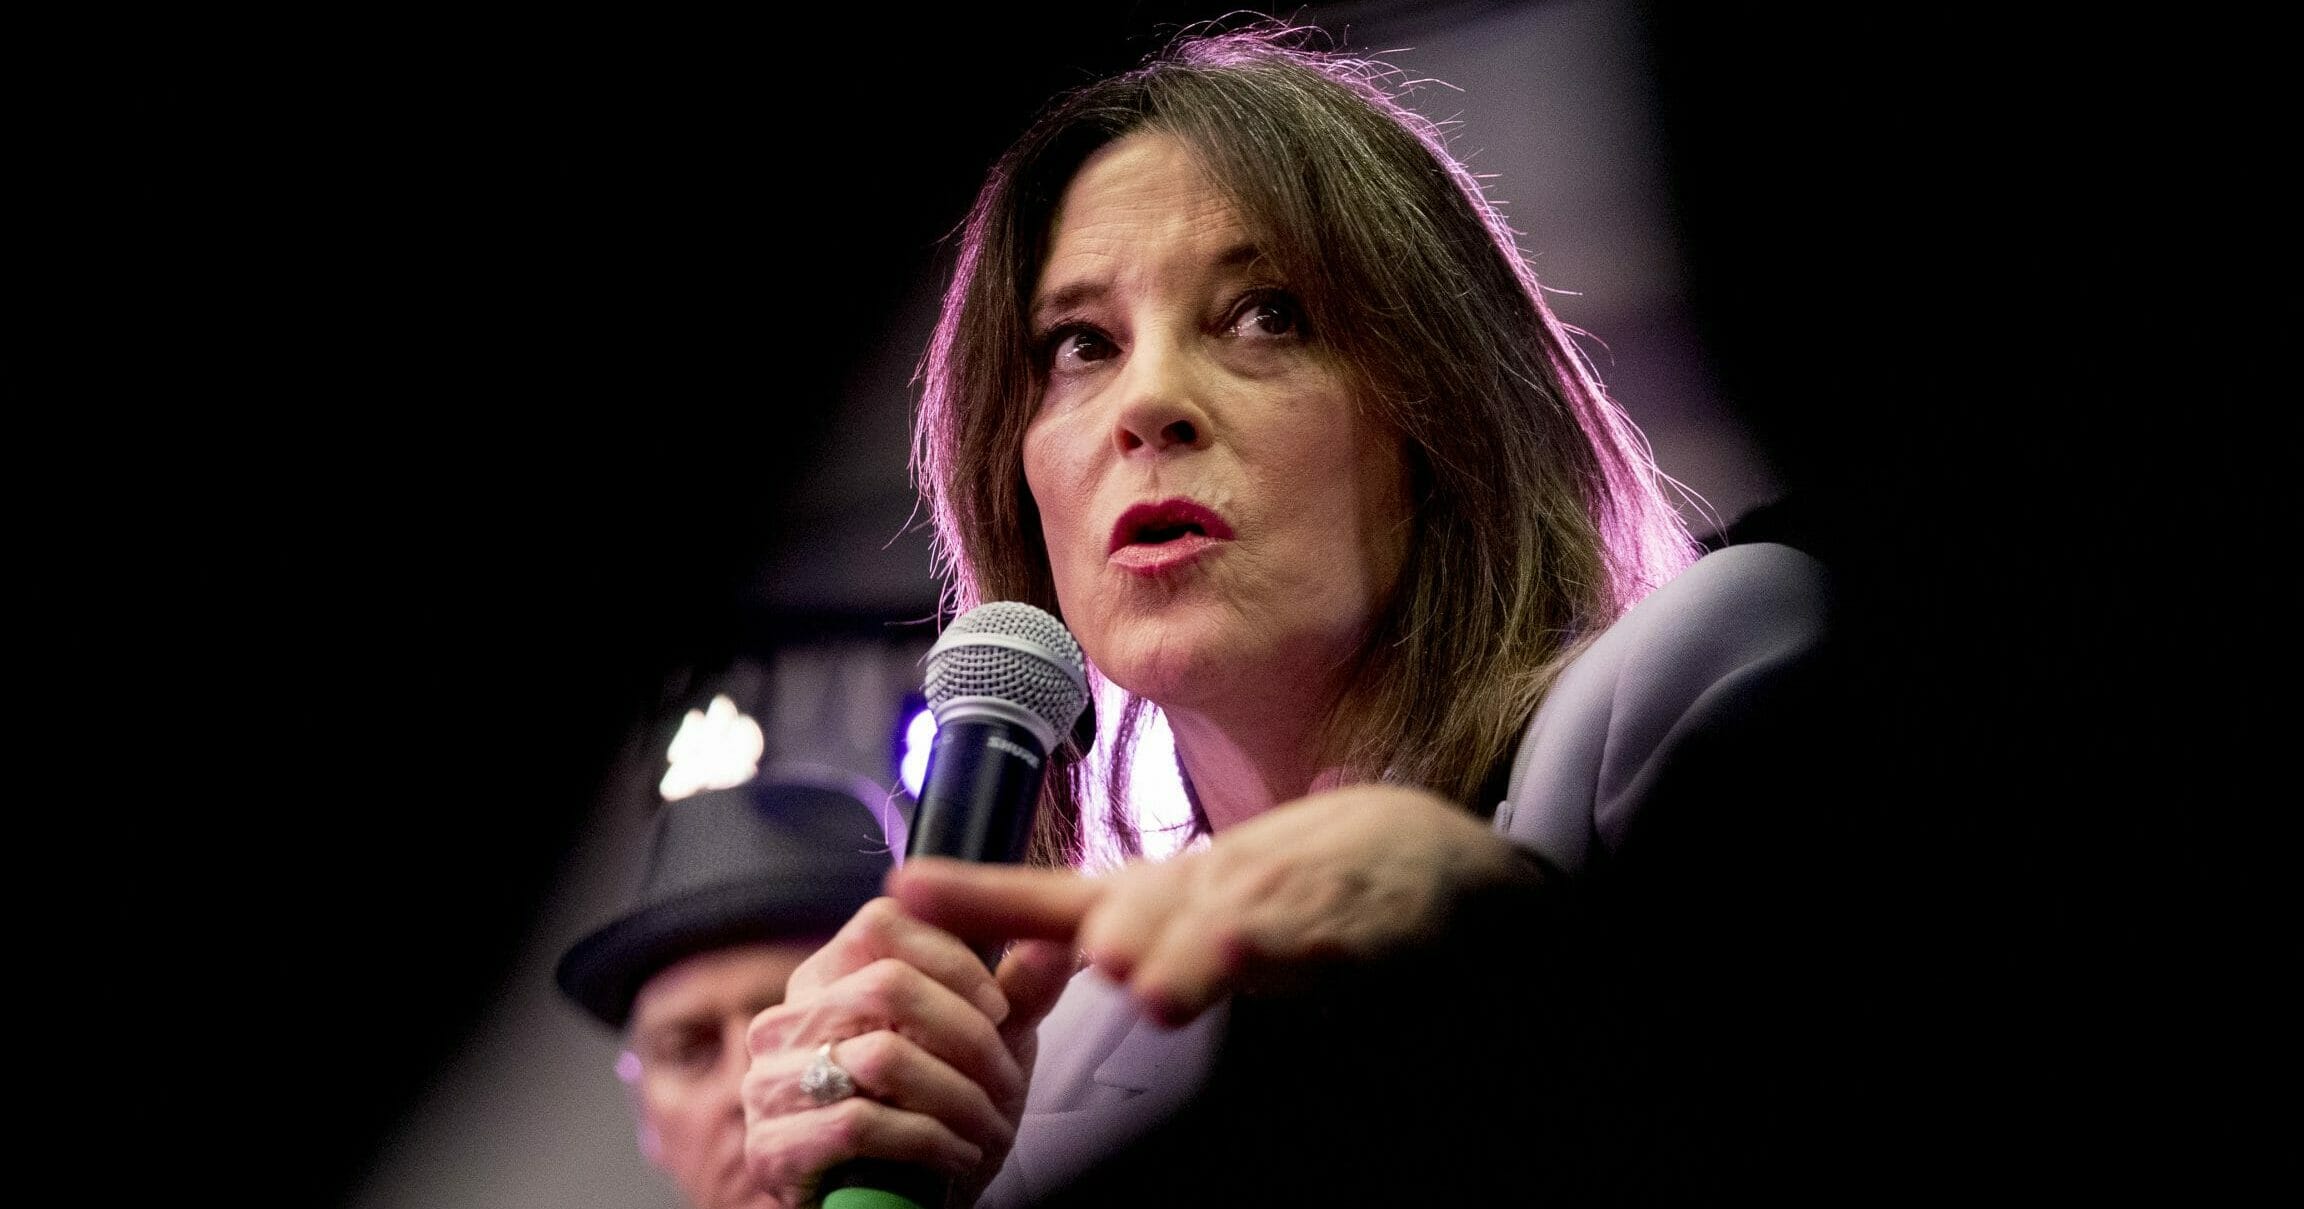 Democratic presidential candidate Marianne Williamson speaks at a the Faith, Politics and the Common Good Forum at Franklin Jr. High School in Des Moines, Iowa, on, Jan. 9, 2020.